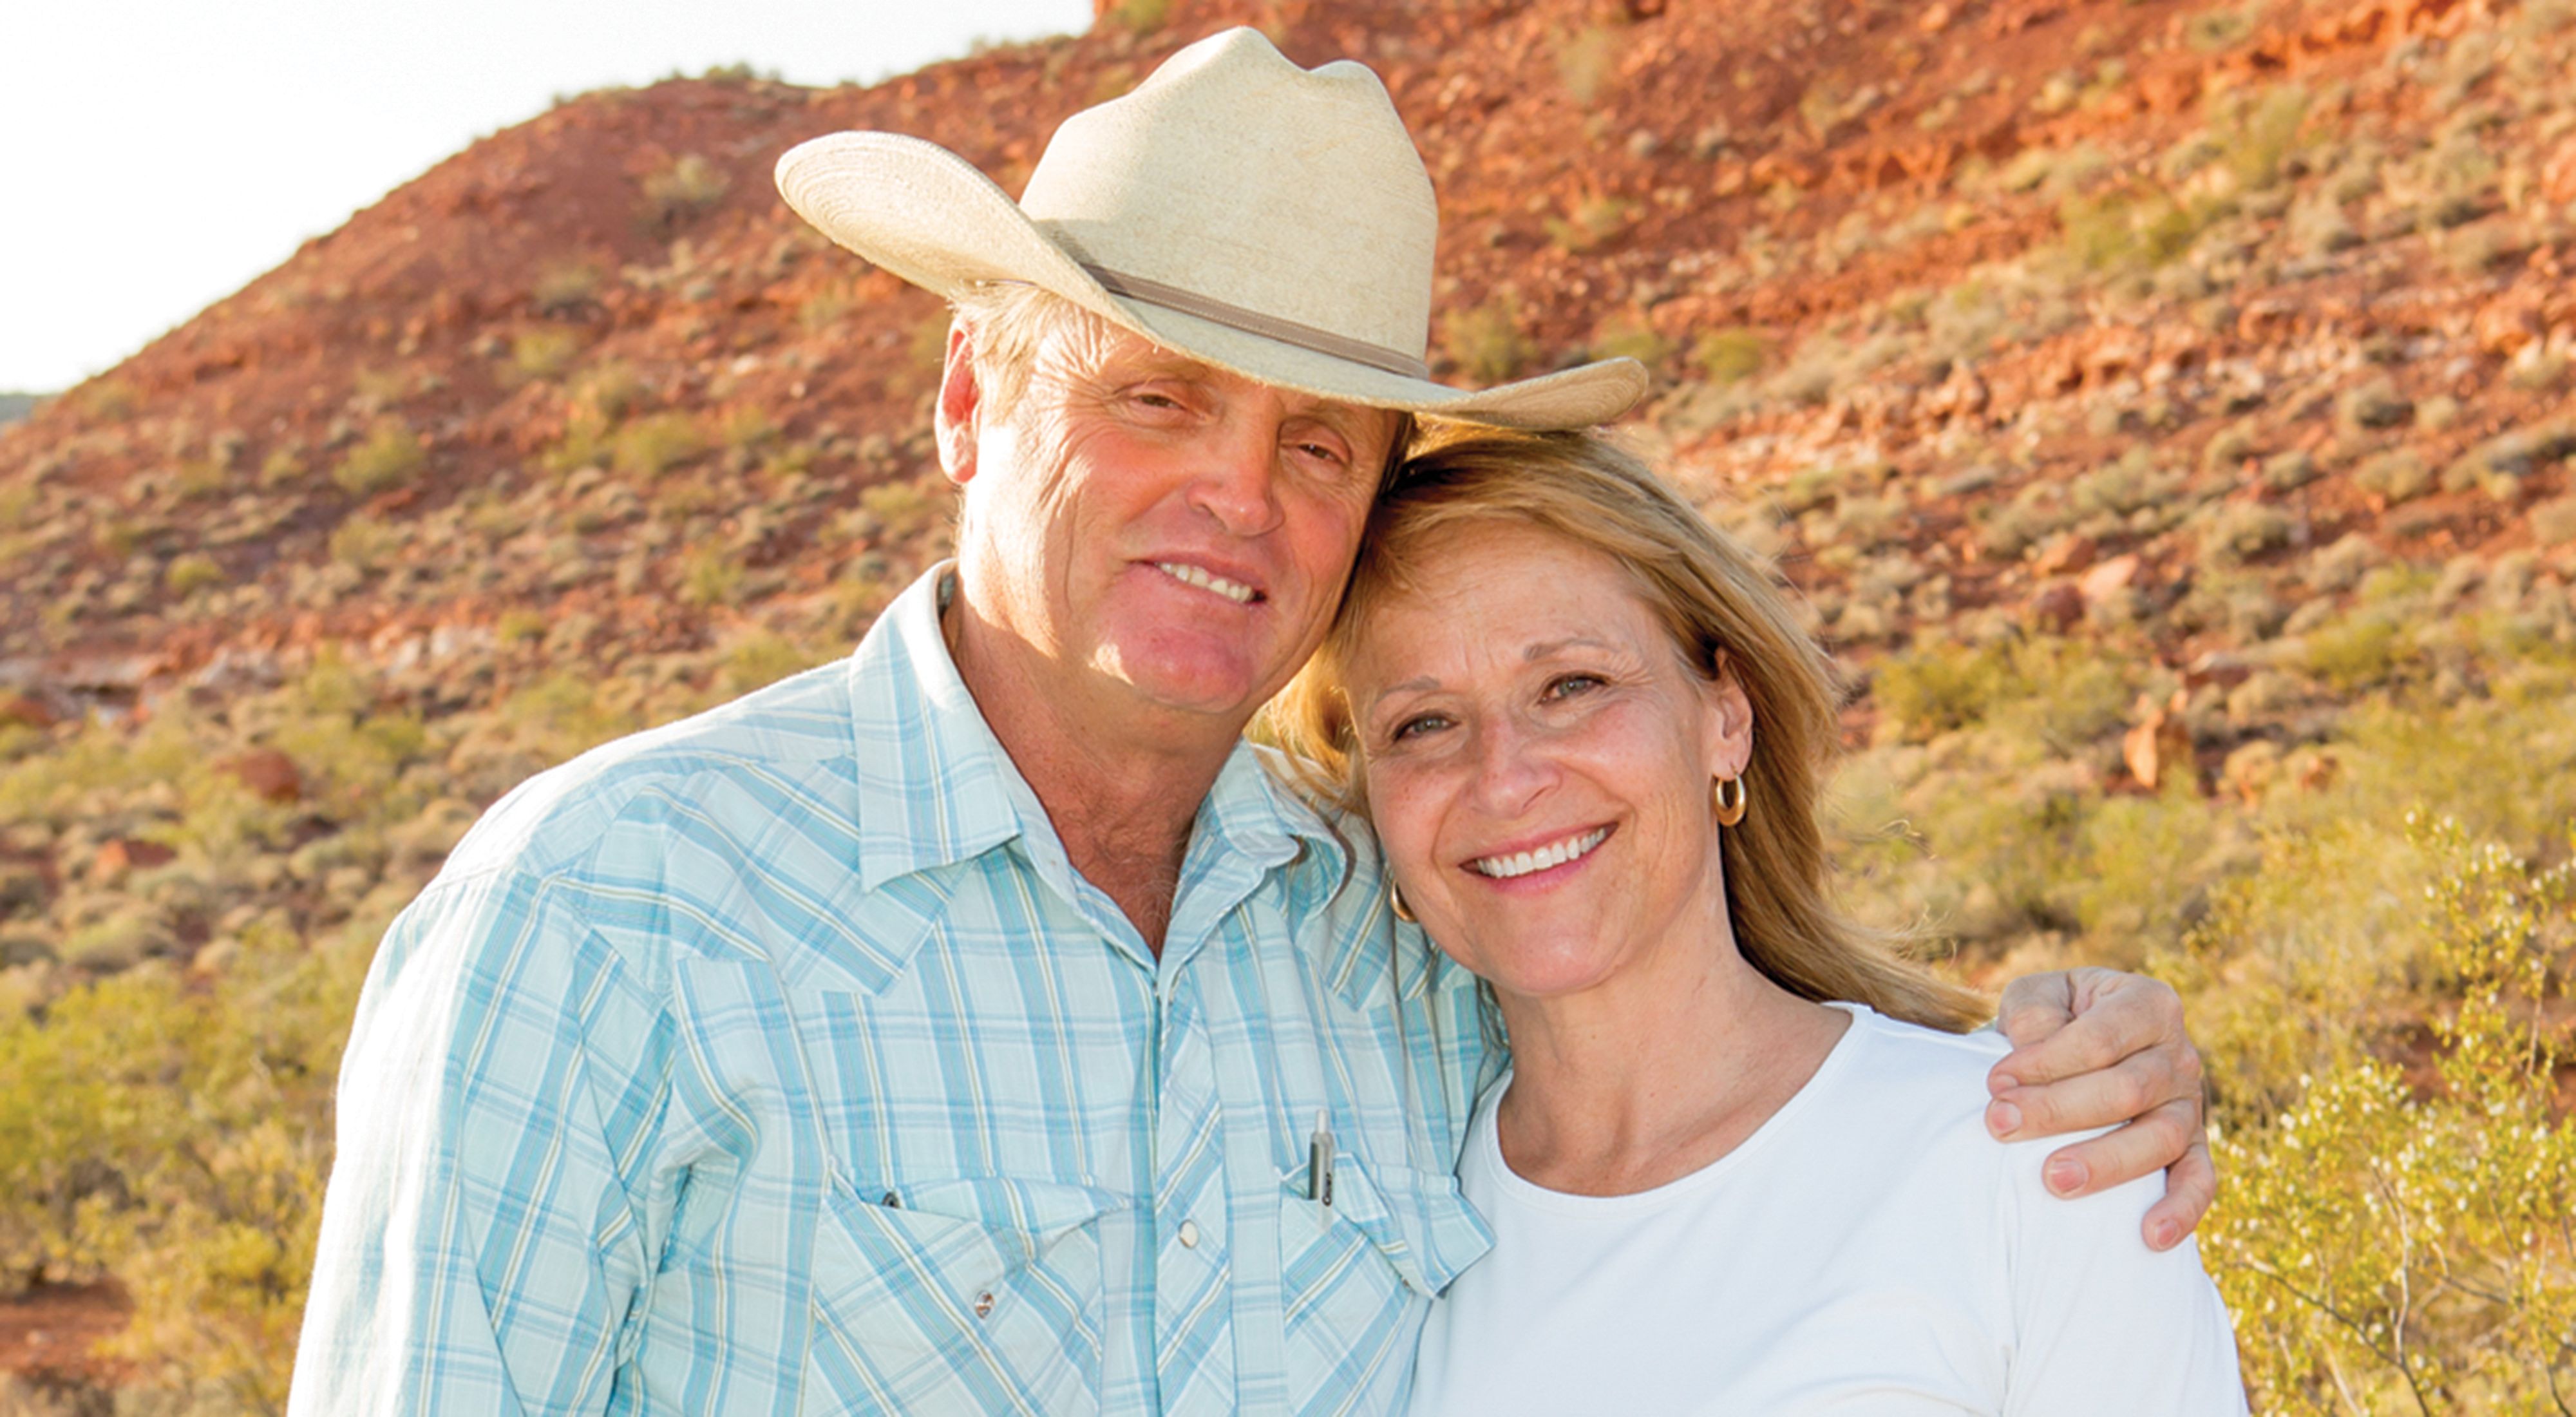 A smiling man in a cowboy hat poses with his arm around a woman who is also smiling. 